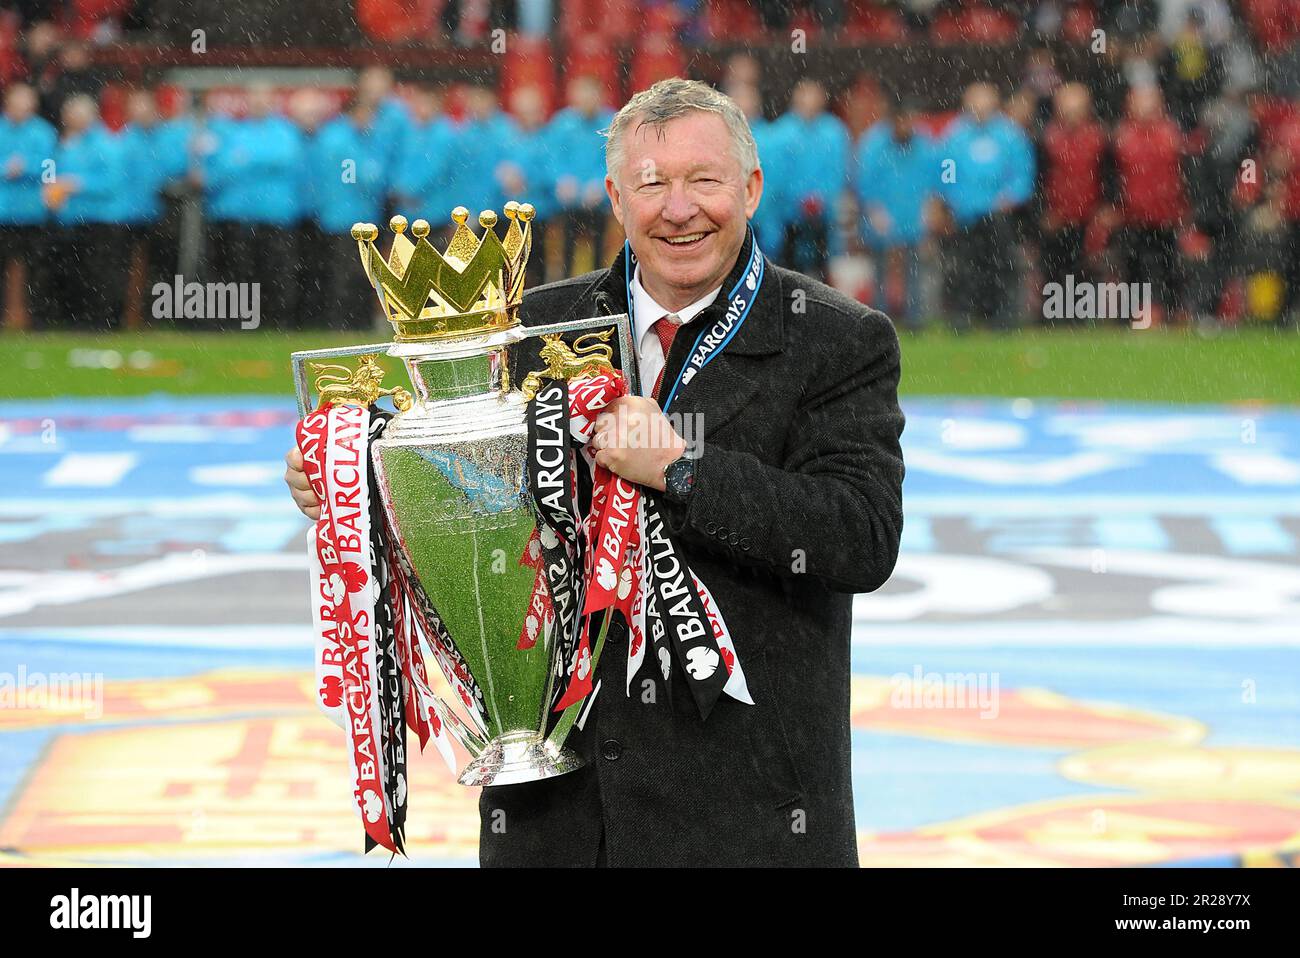 File photo dated 12-05-2013 of Manchester United manager Sir Alex Ferguson celebrates with the Barclays Premier League trophy. United won the Premier League in five of Ferguson’s last 10 years in charge, taking his total to 13 titles overall. That included a run of three in a row from 2006-07 to 2008-09, before he added the 2010-11 title and signed off in 2012-13 with another. Issue date: Thursday May 18, 2023. Stock Photo